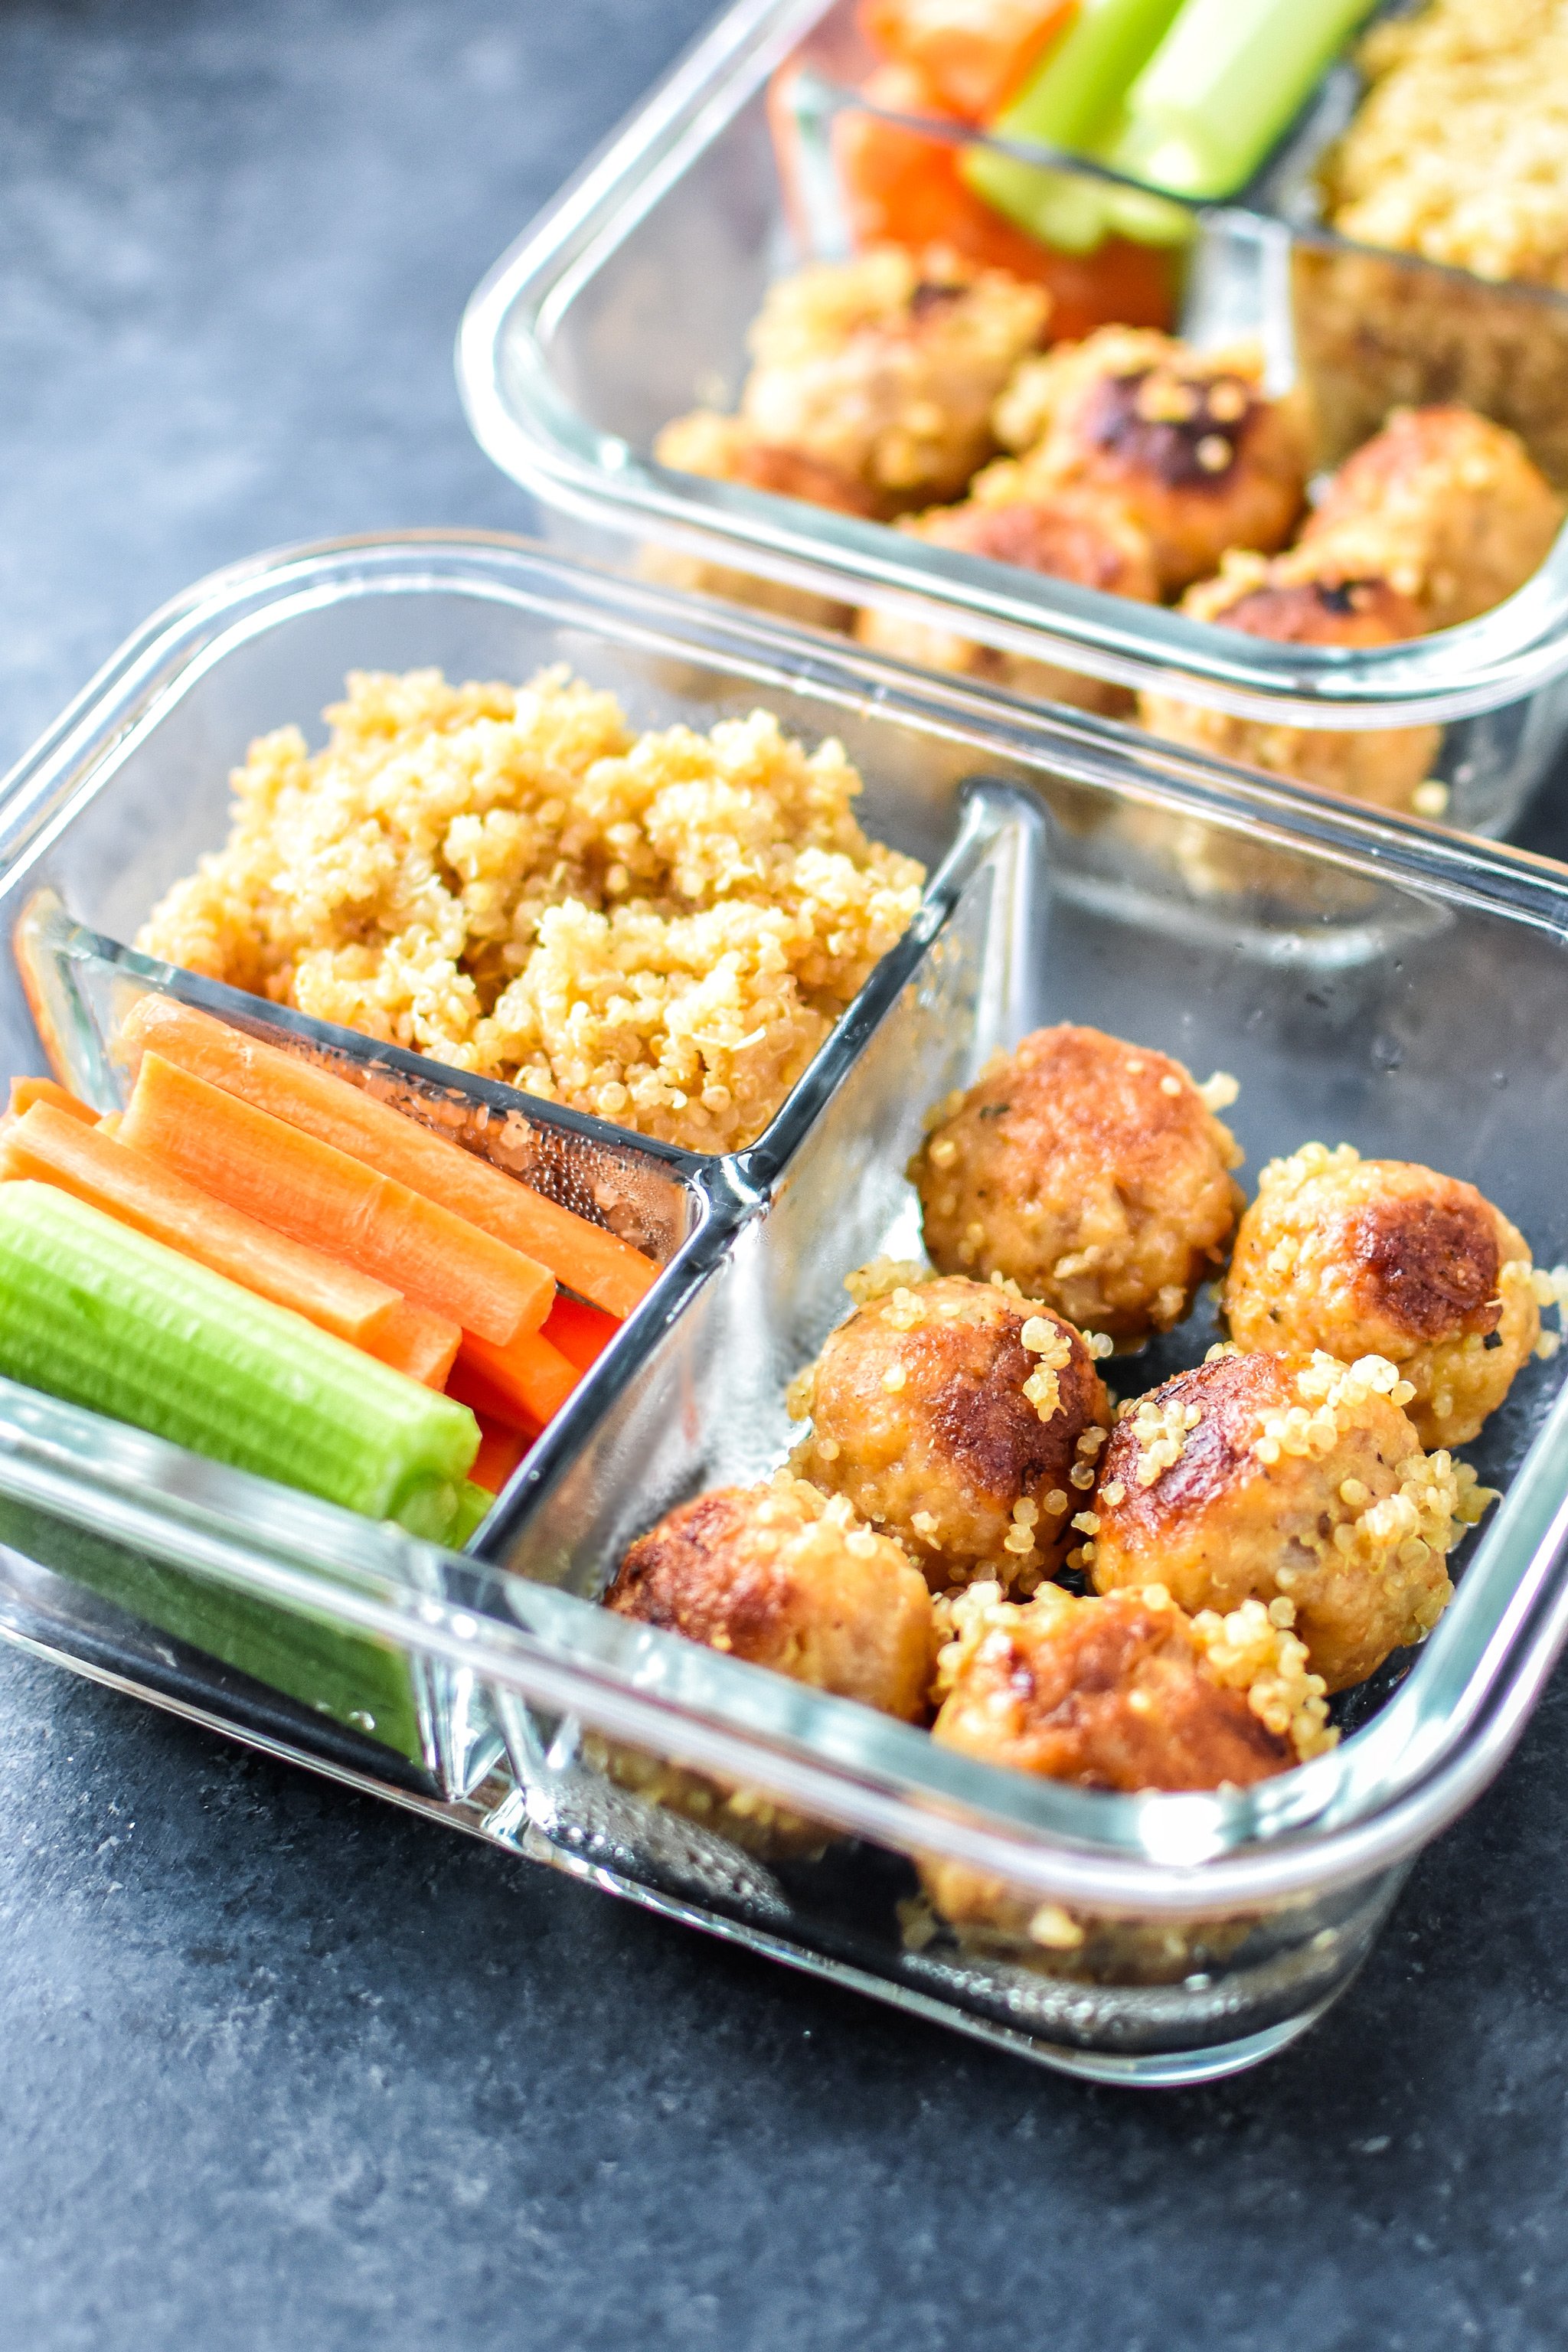 Buffalo chicken meatballs with quinoa and raw veggies in glass meal prep containers.